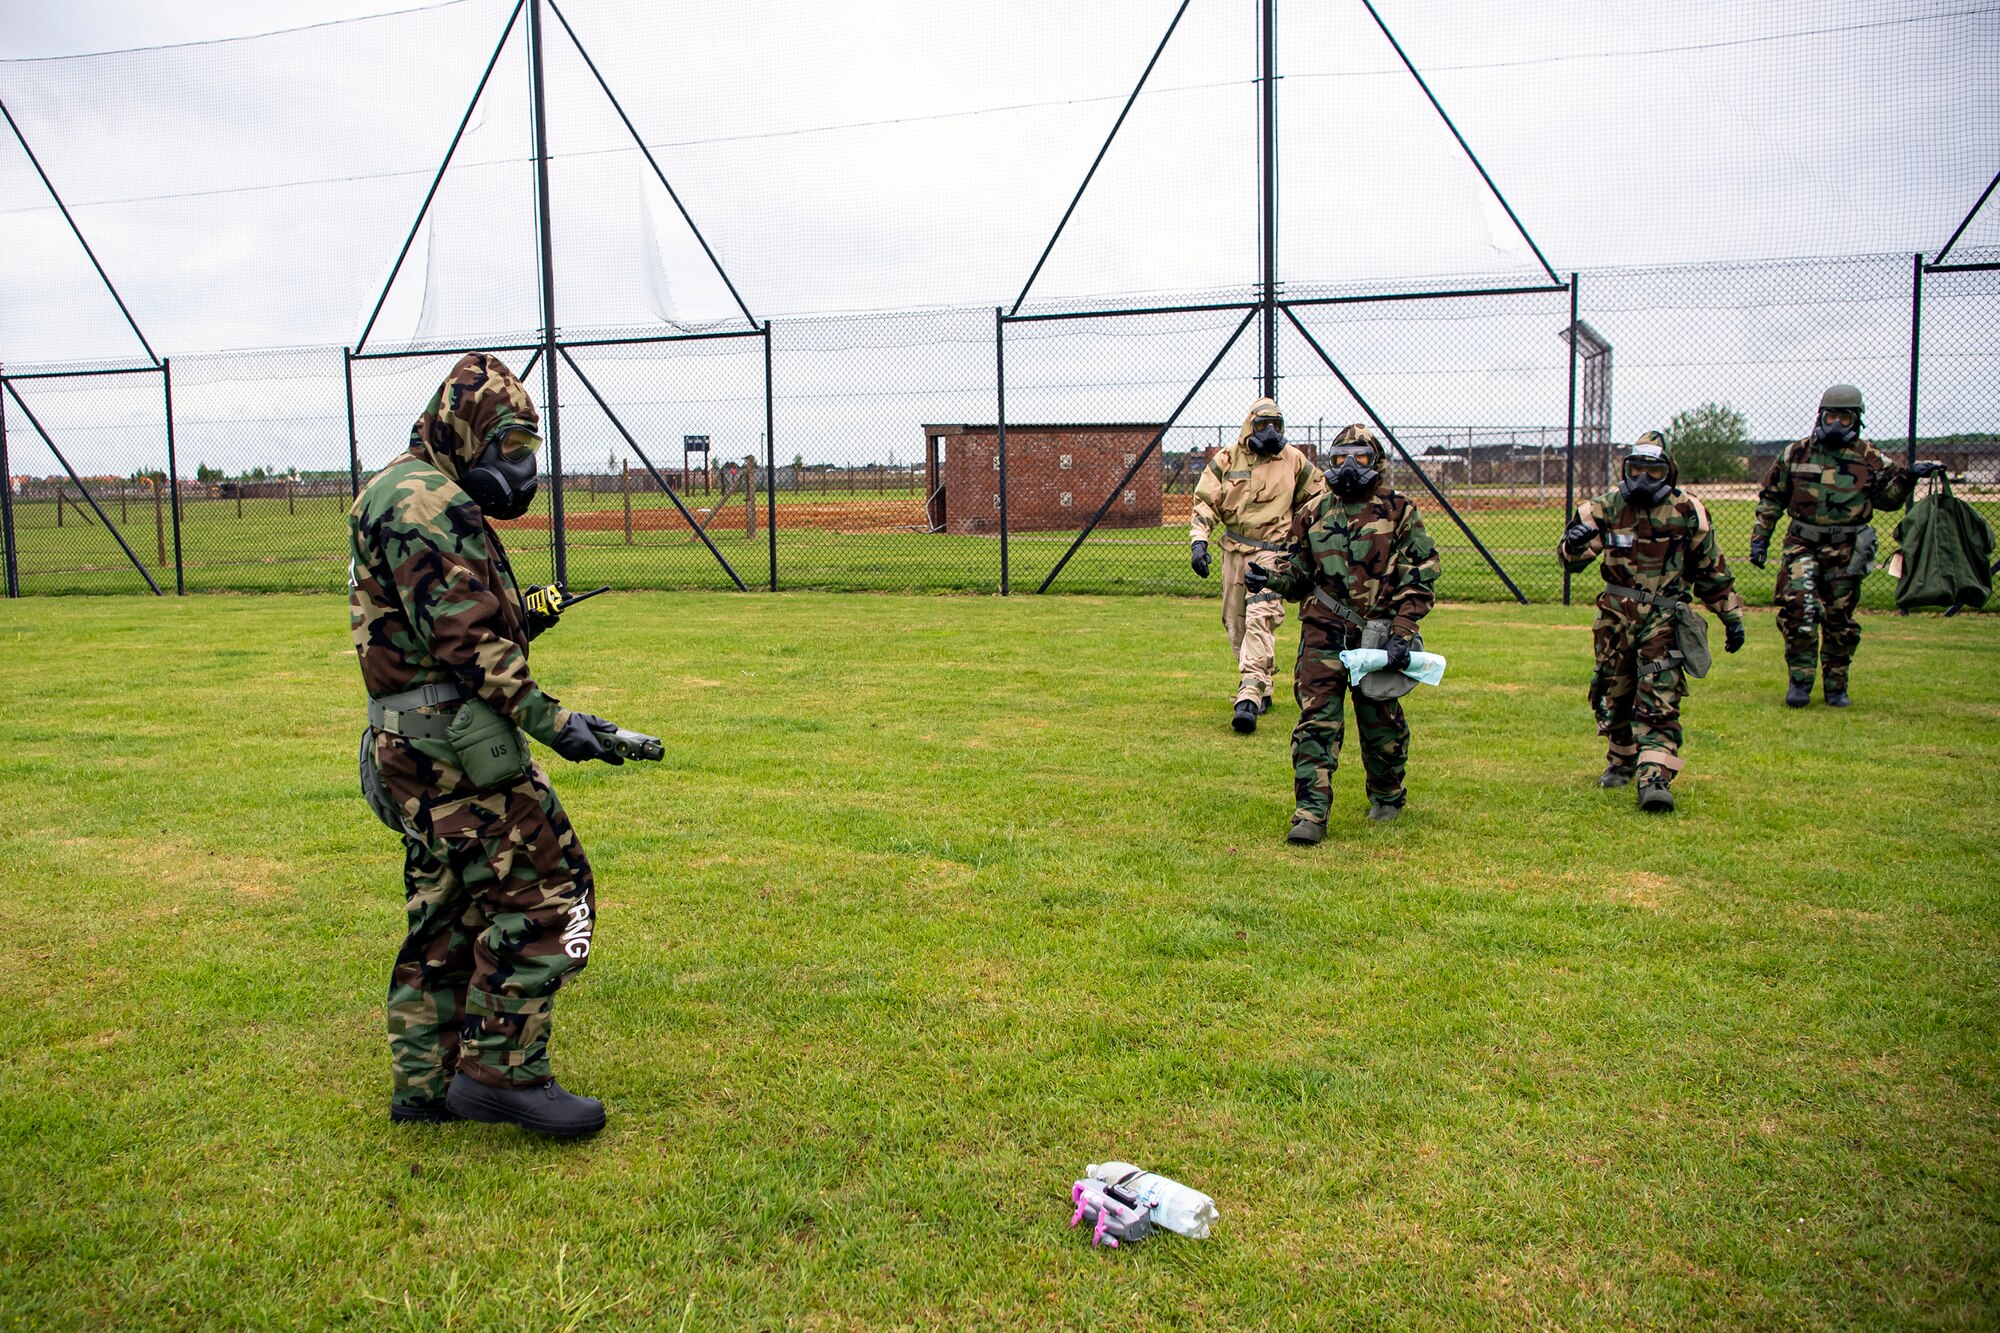 An Airman from the 423d Civil Engineer Squadron, identifies a simulated contaminated area during an exercise at RAF Alconbury, England, May 19, 2022. The exercise was geared towards training Airmen on how to properly control and examine a contaminated area after a simulated chemical attack while in Mission Oriented Protective Posture Gear. (U.S. Air Force photo by Staff Sgt. Eugene Oliver)